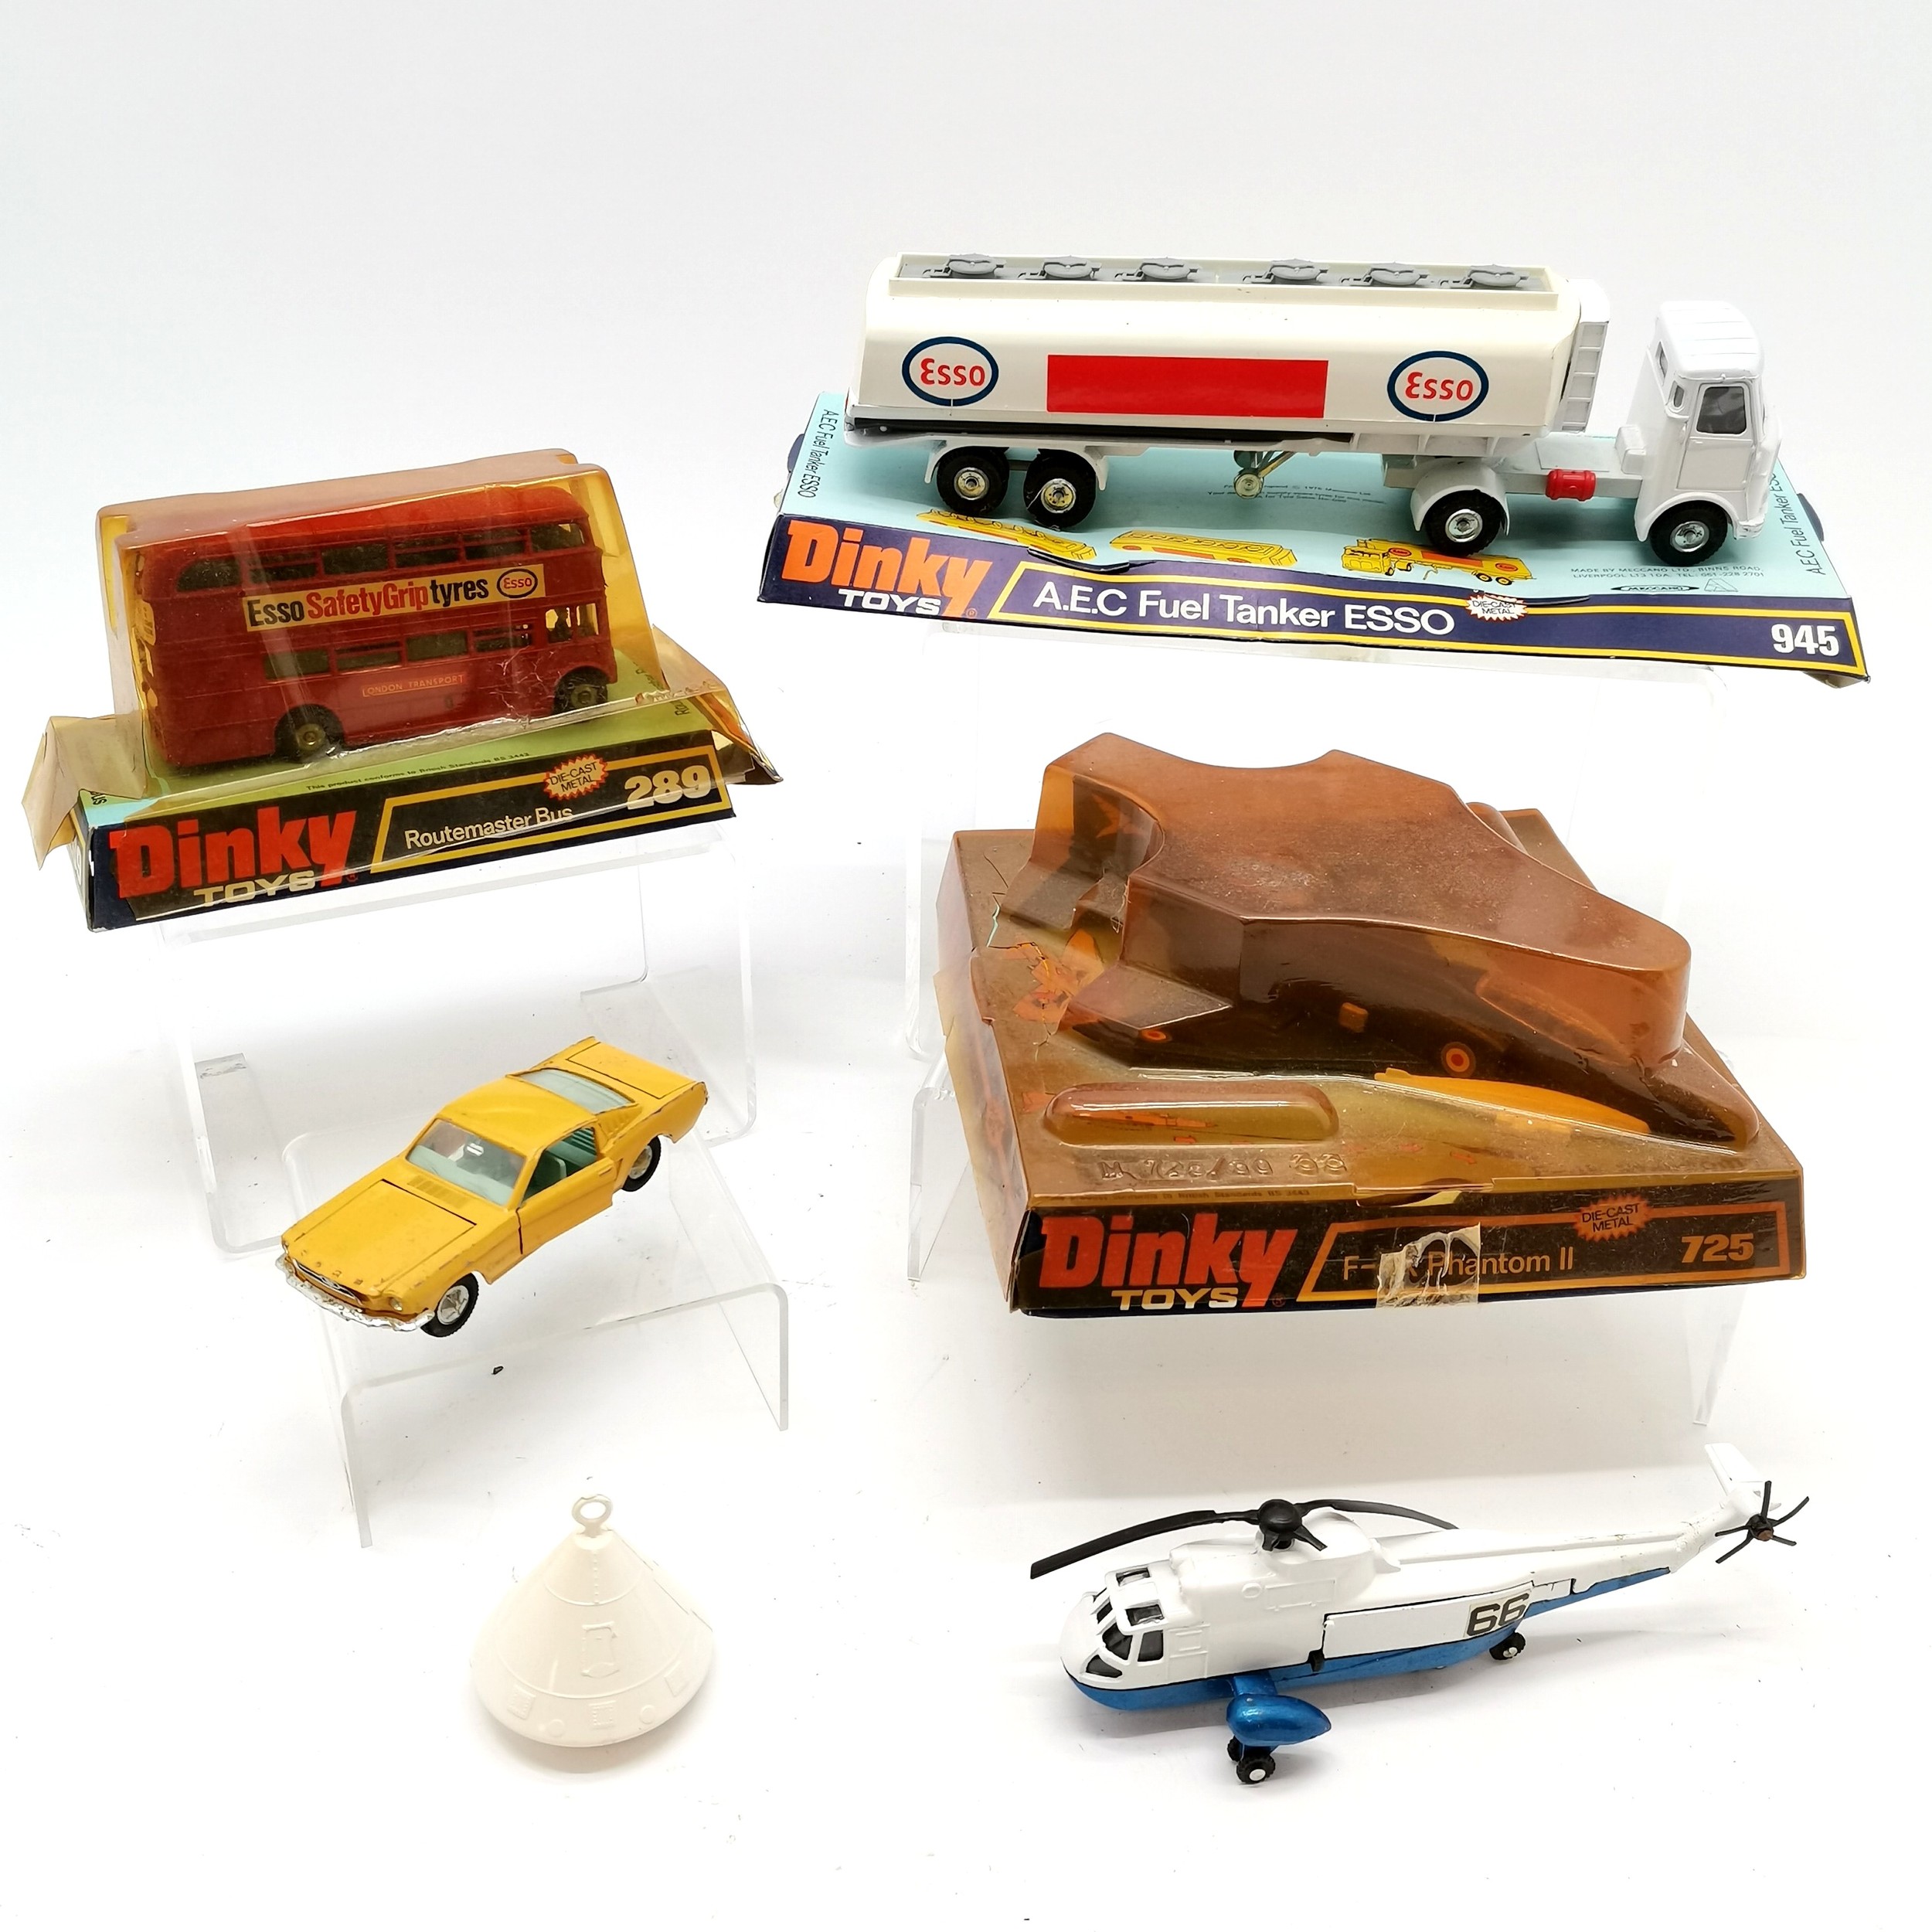 Collection of boxed and unboxed Dinky toys including 725 F-4K Phantom II, 289 Routemaster bus, A.E.C